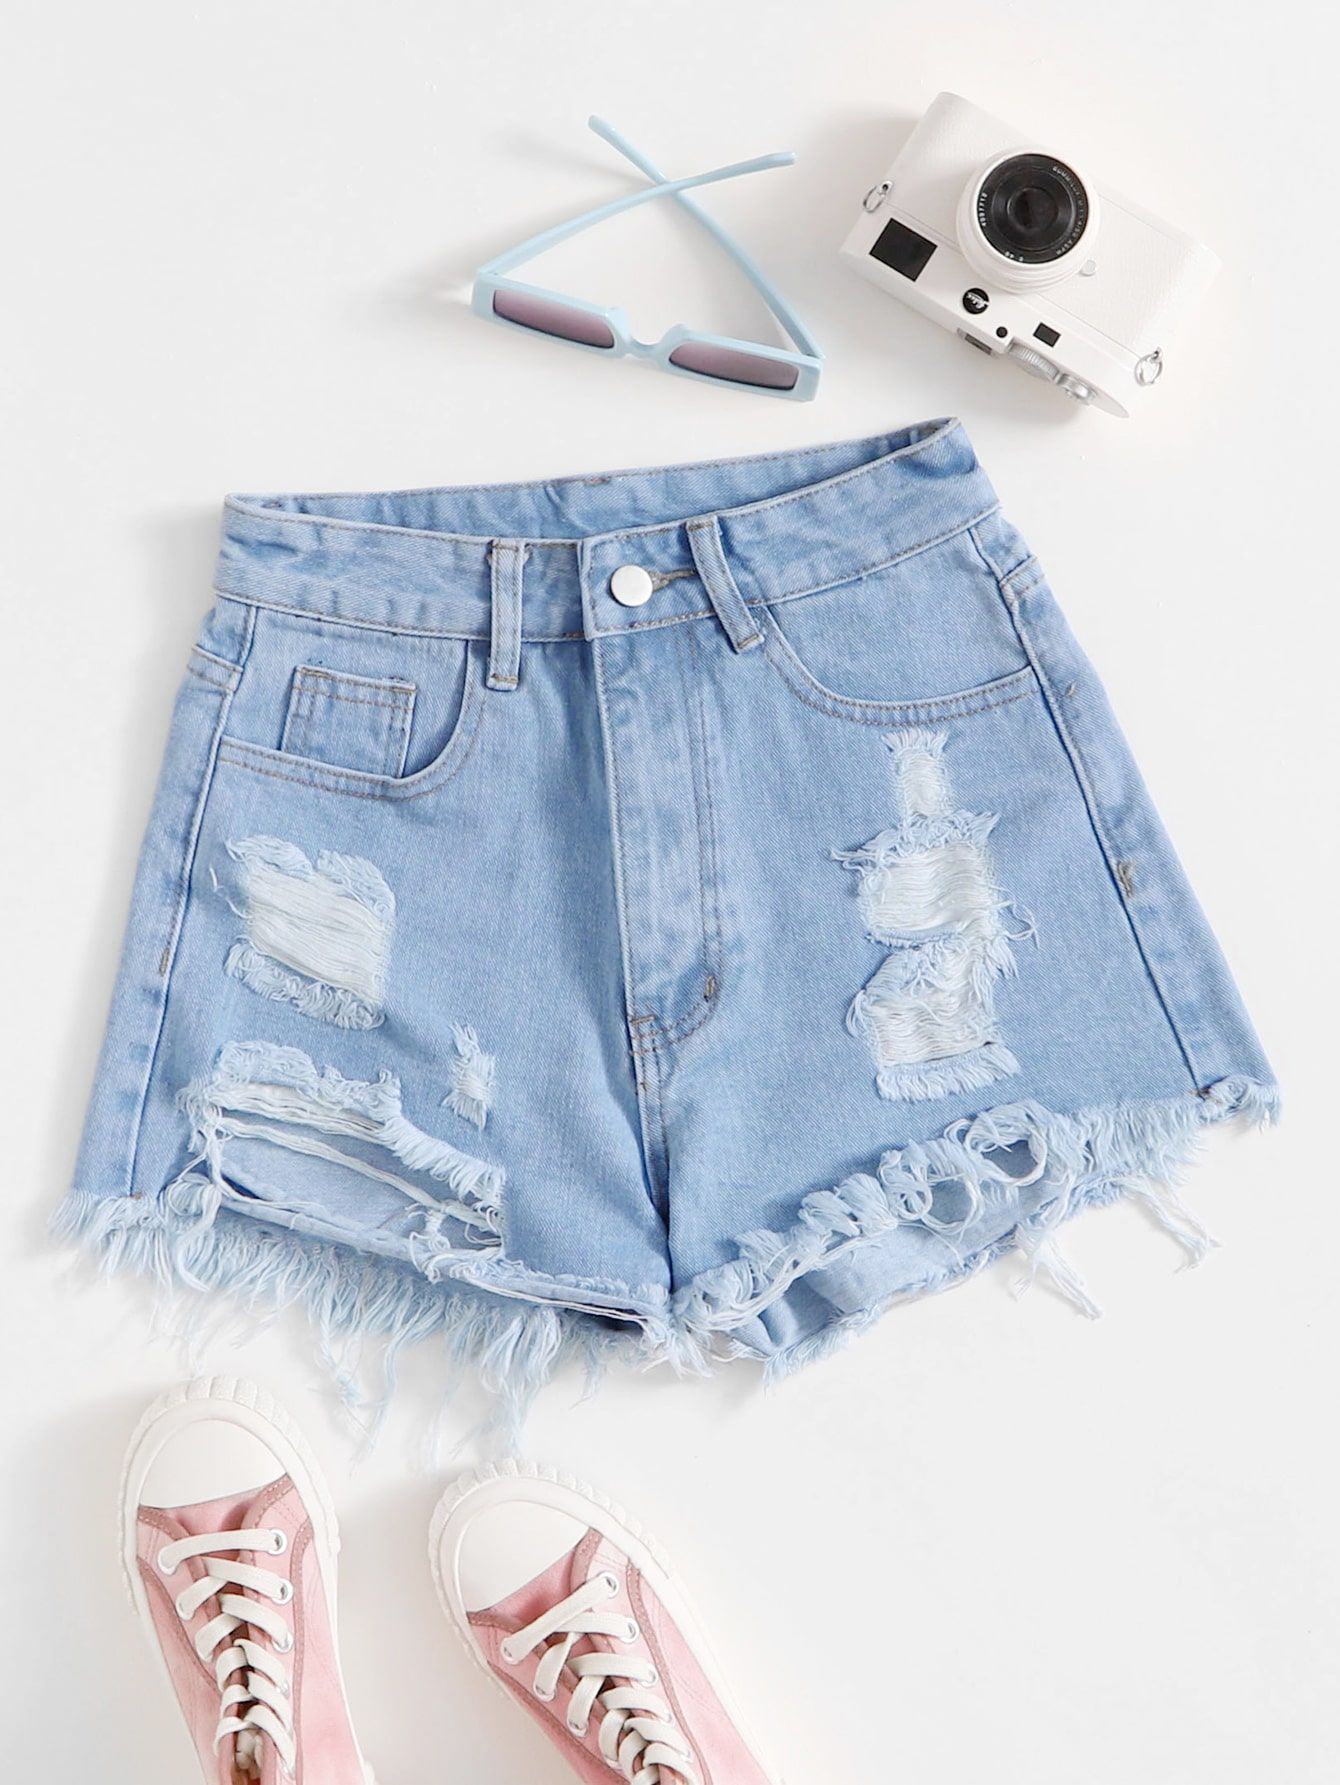 How to Wear Ripped Jean Shorts: Top 13 Stylish Outfit Ideas for Women